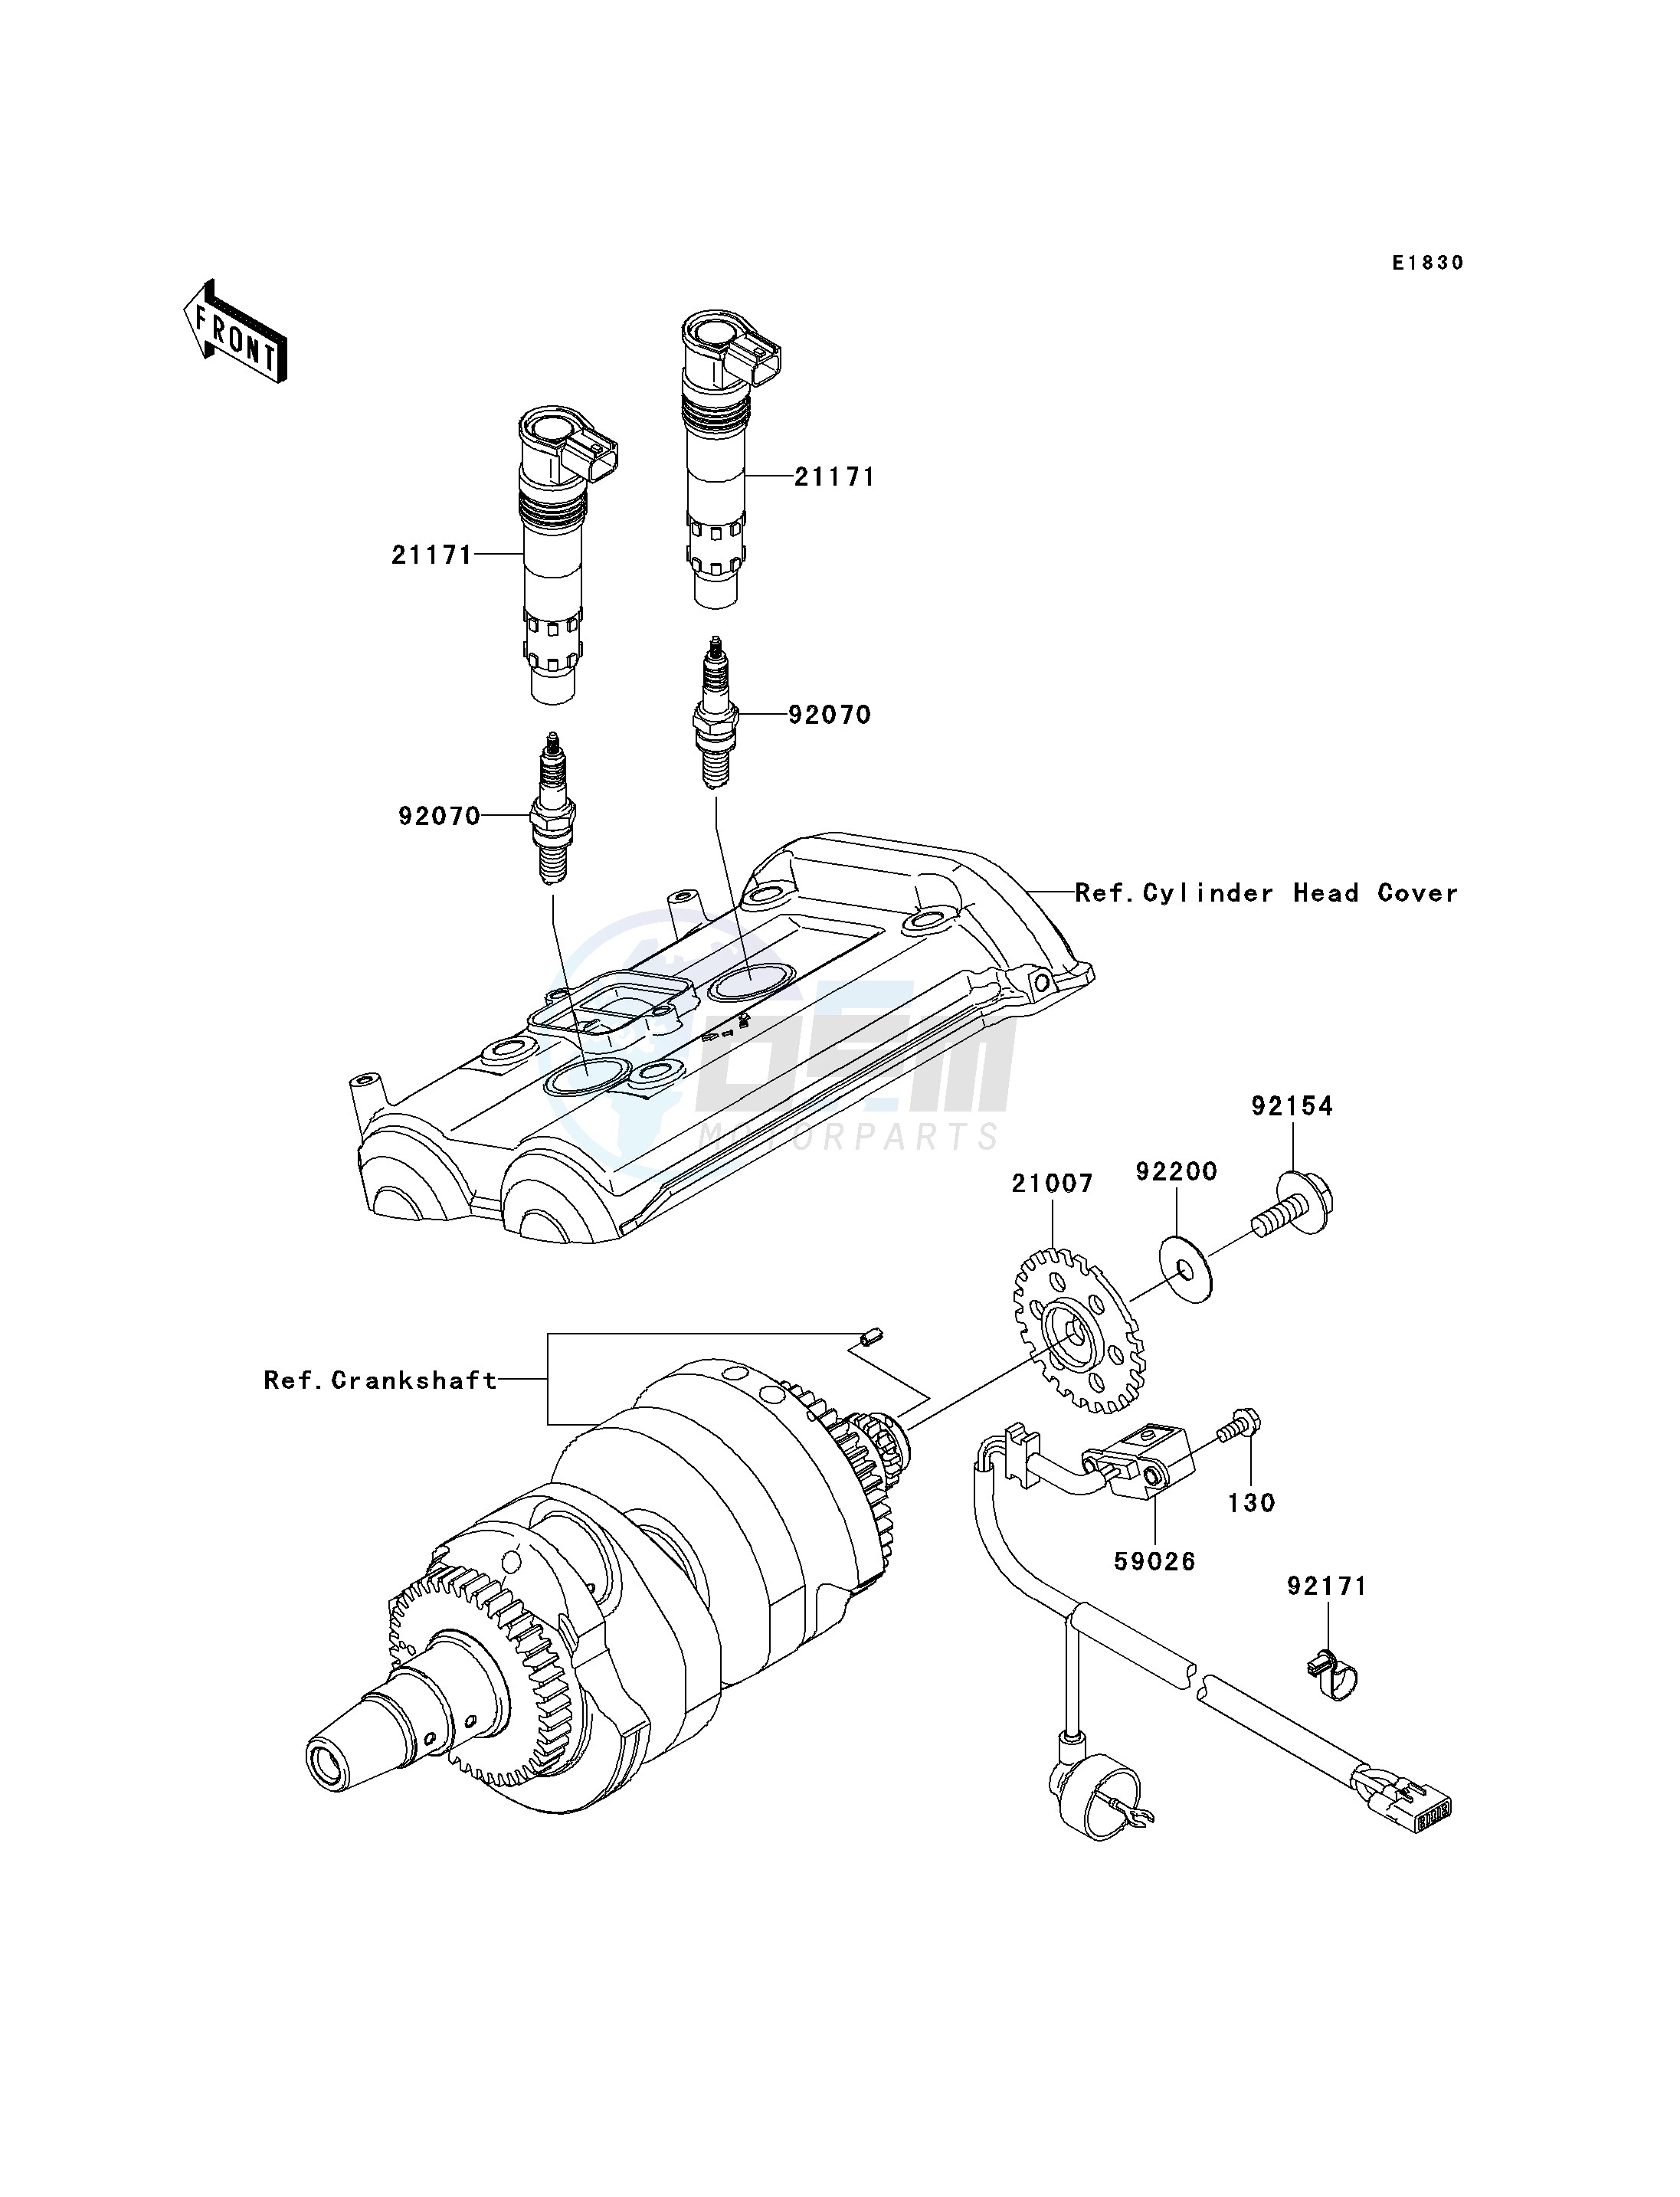 IGNITION SYSTEM image